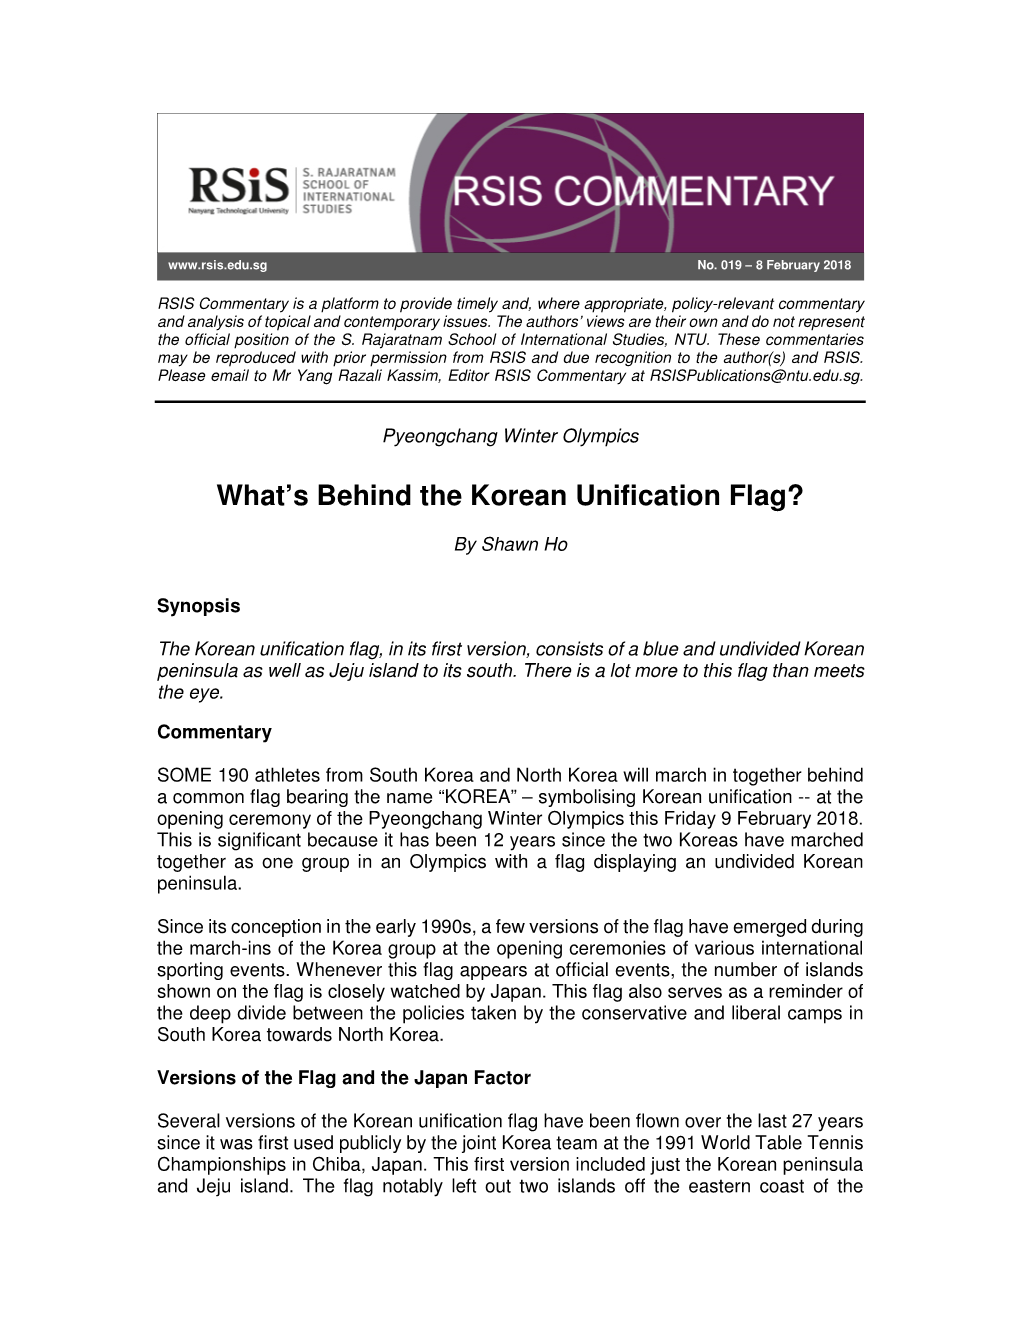 What's Behind the Korean Unification Flag?